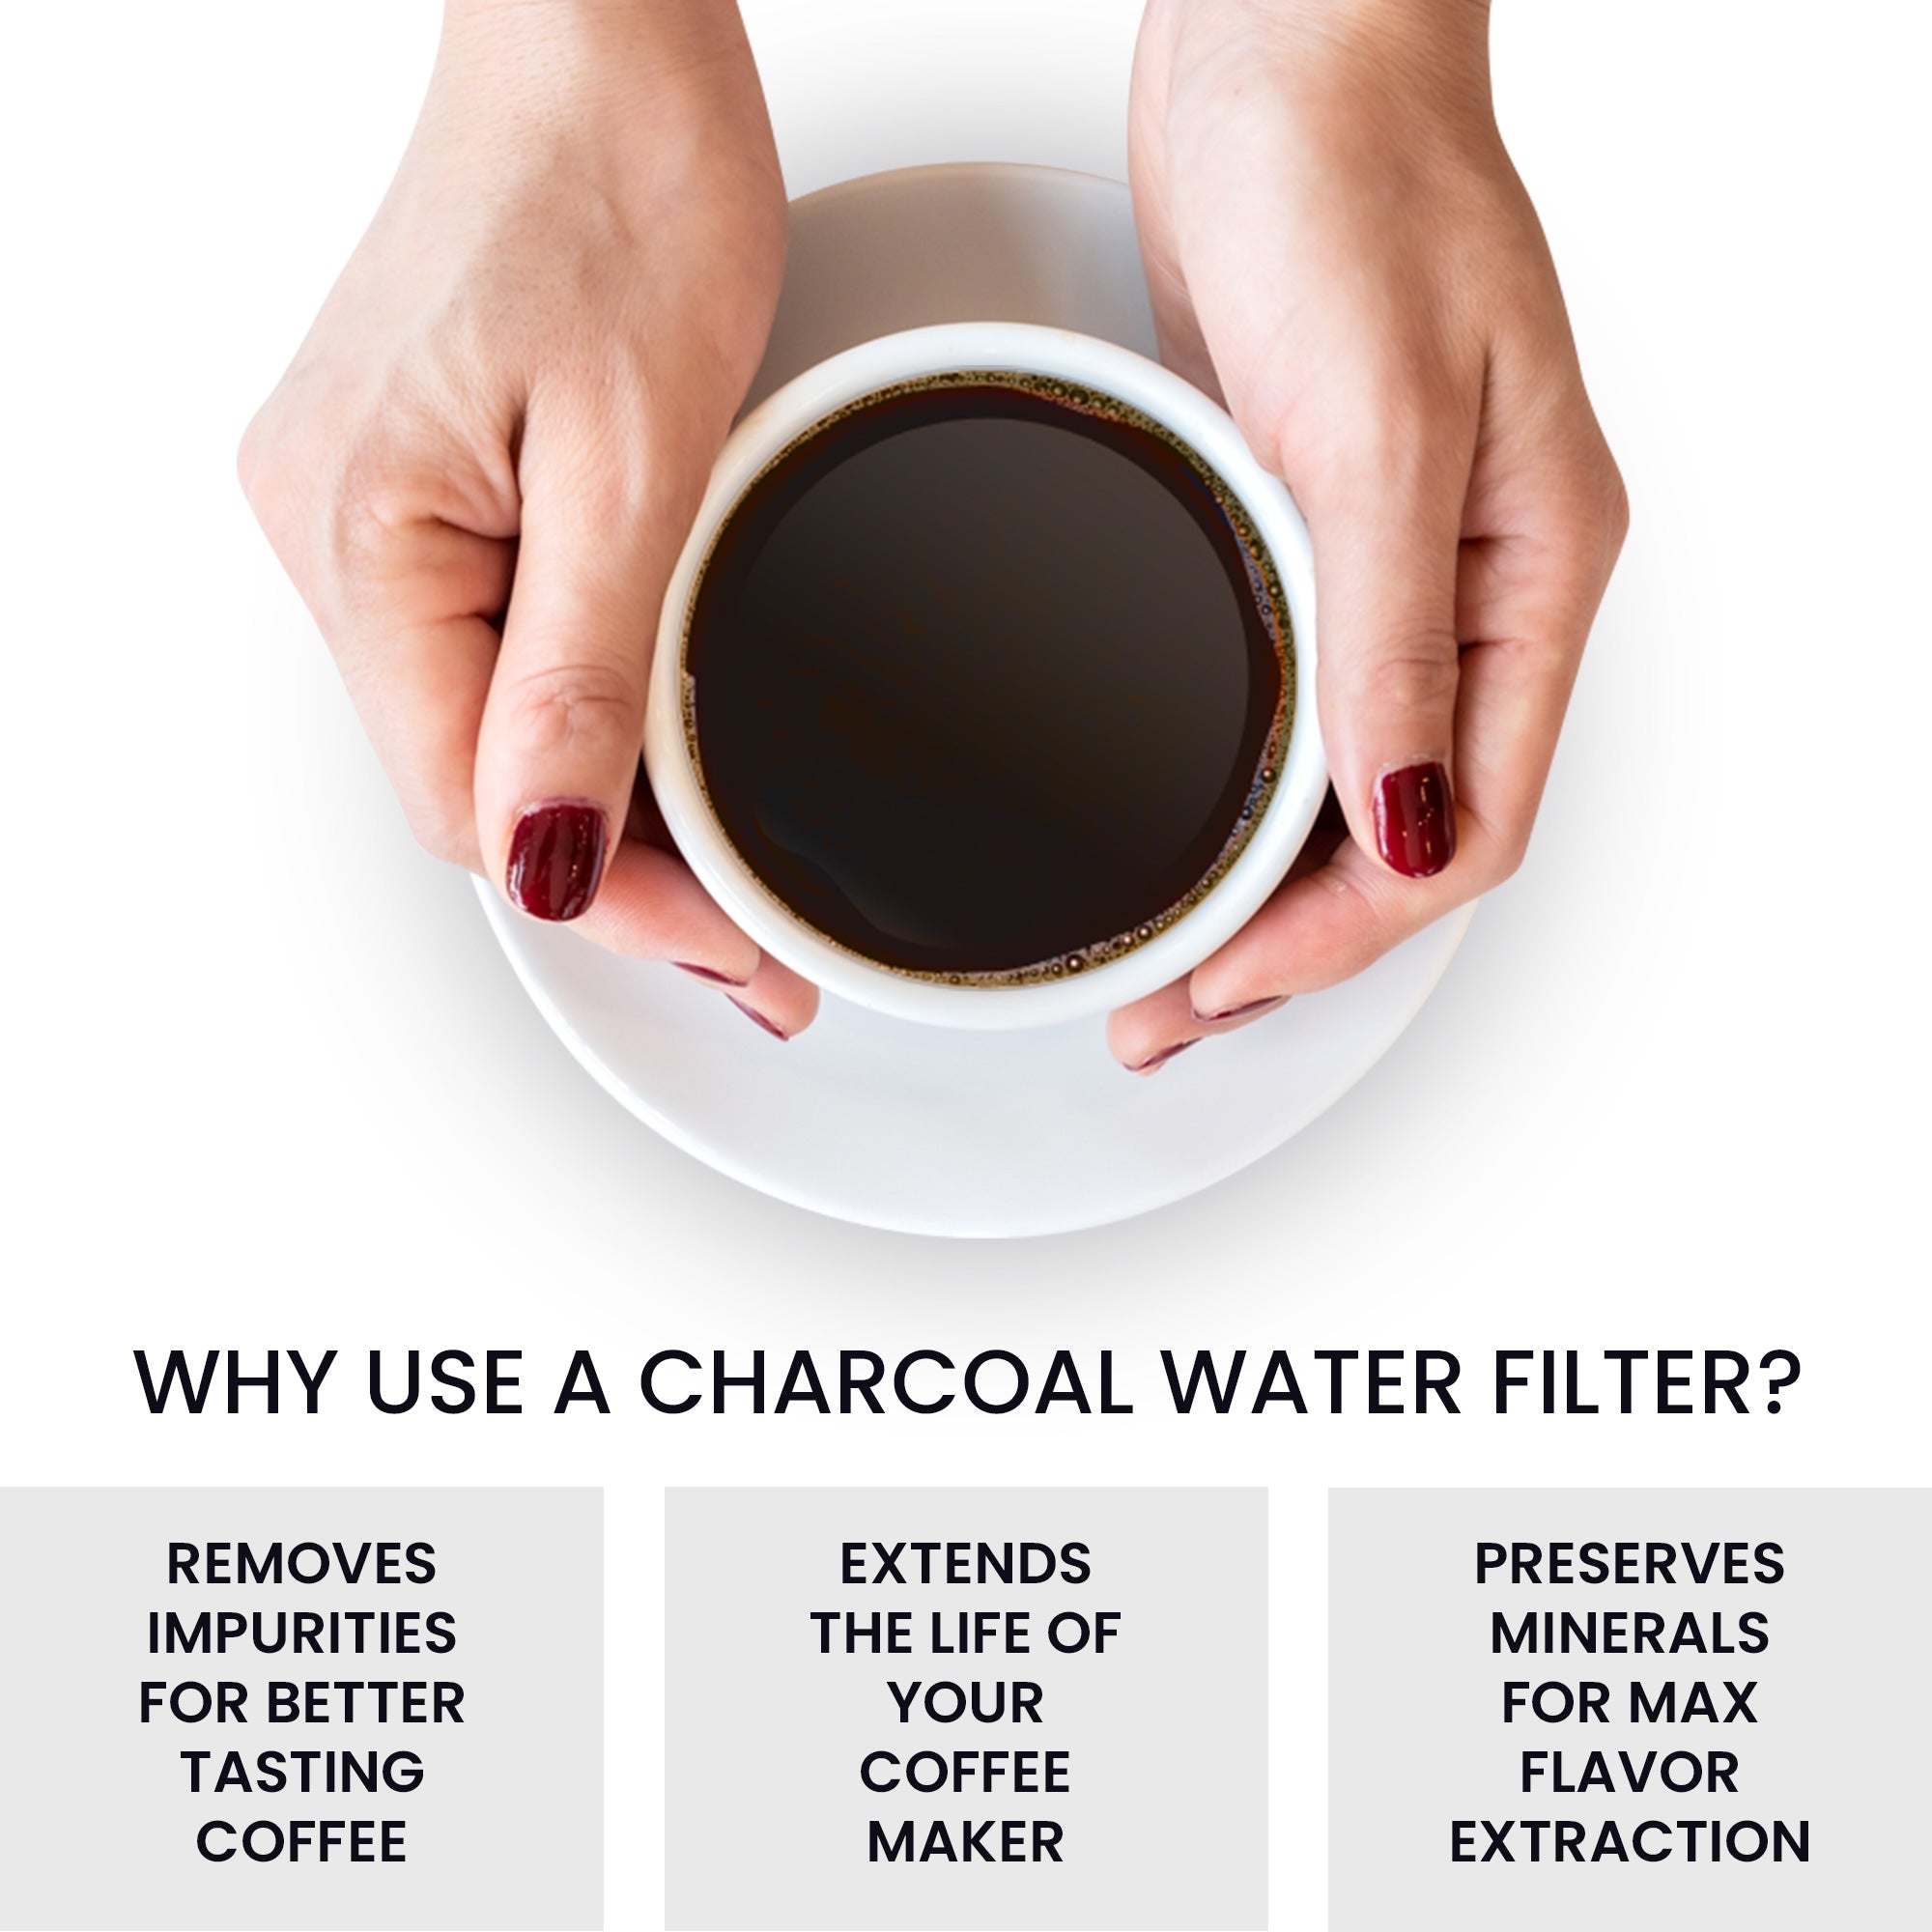 Image of two hands holding a white cup full of coffee on a white saucer against a white background. Text below reads, "Why use a charcoal water filter? Removes impurities for better tasting coffee; extends the life of your coffee maker; preserves minerals for max flavor extraction"